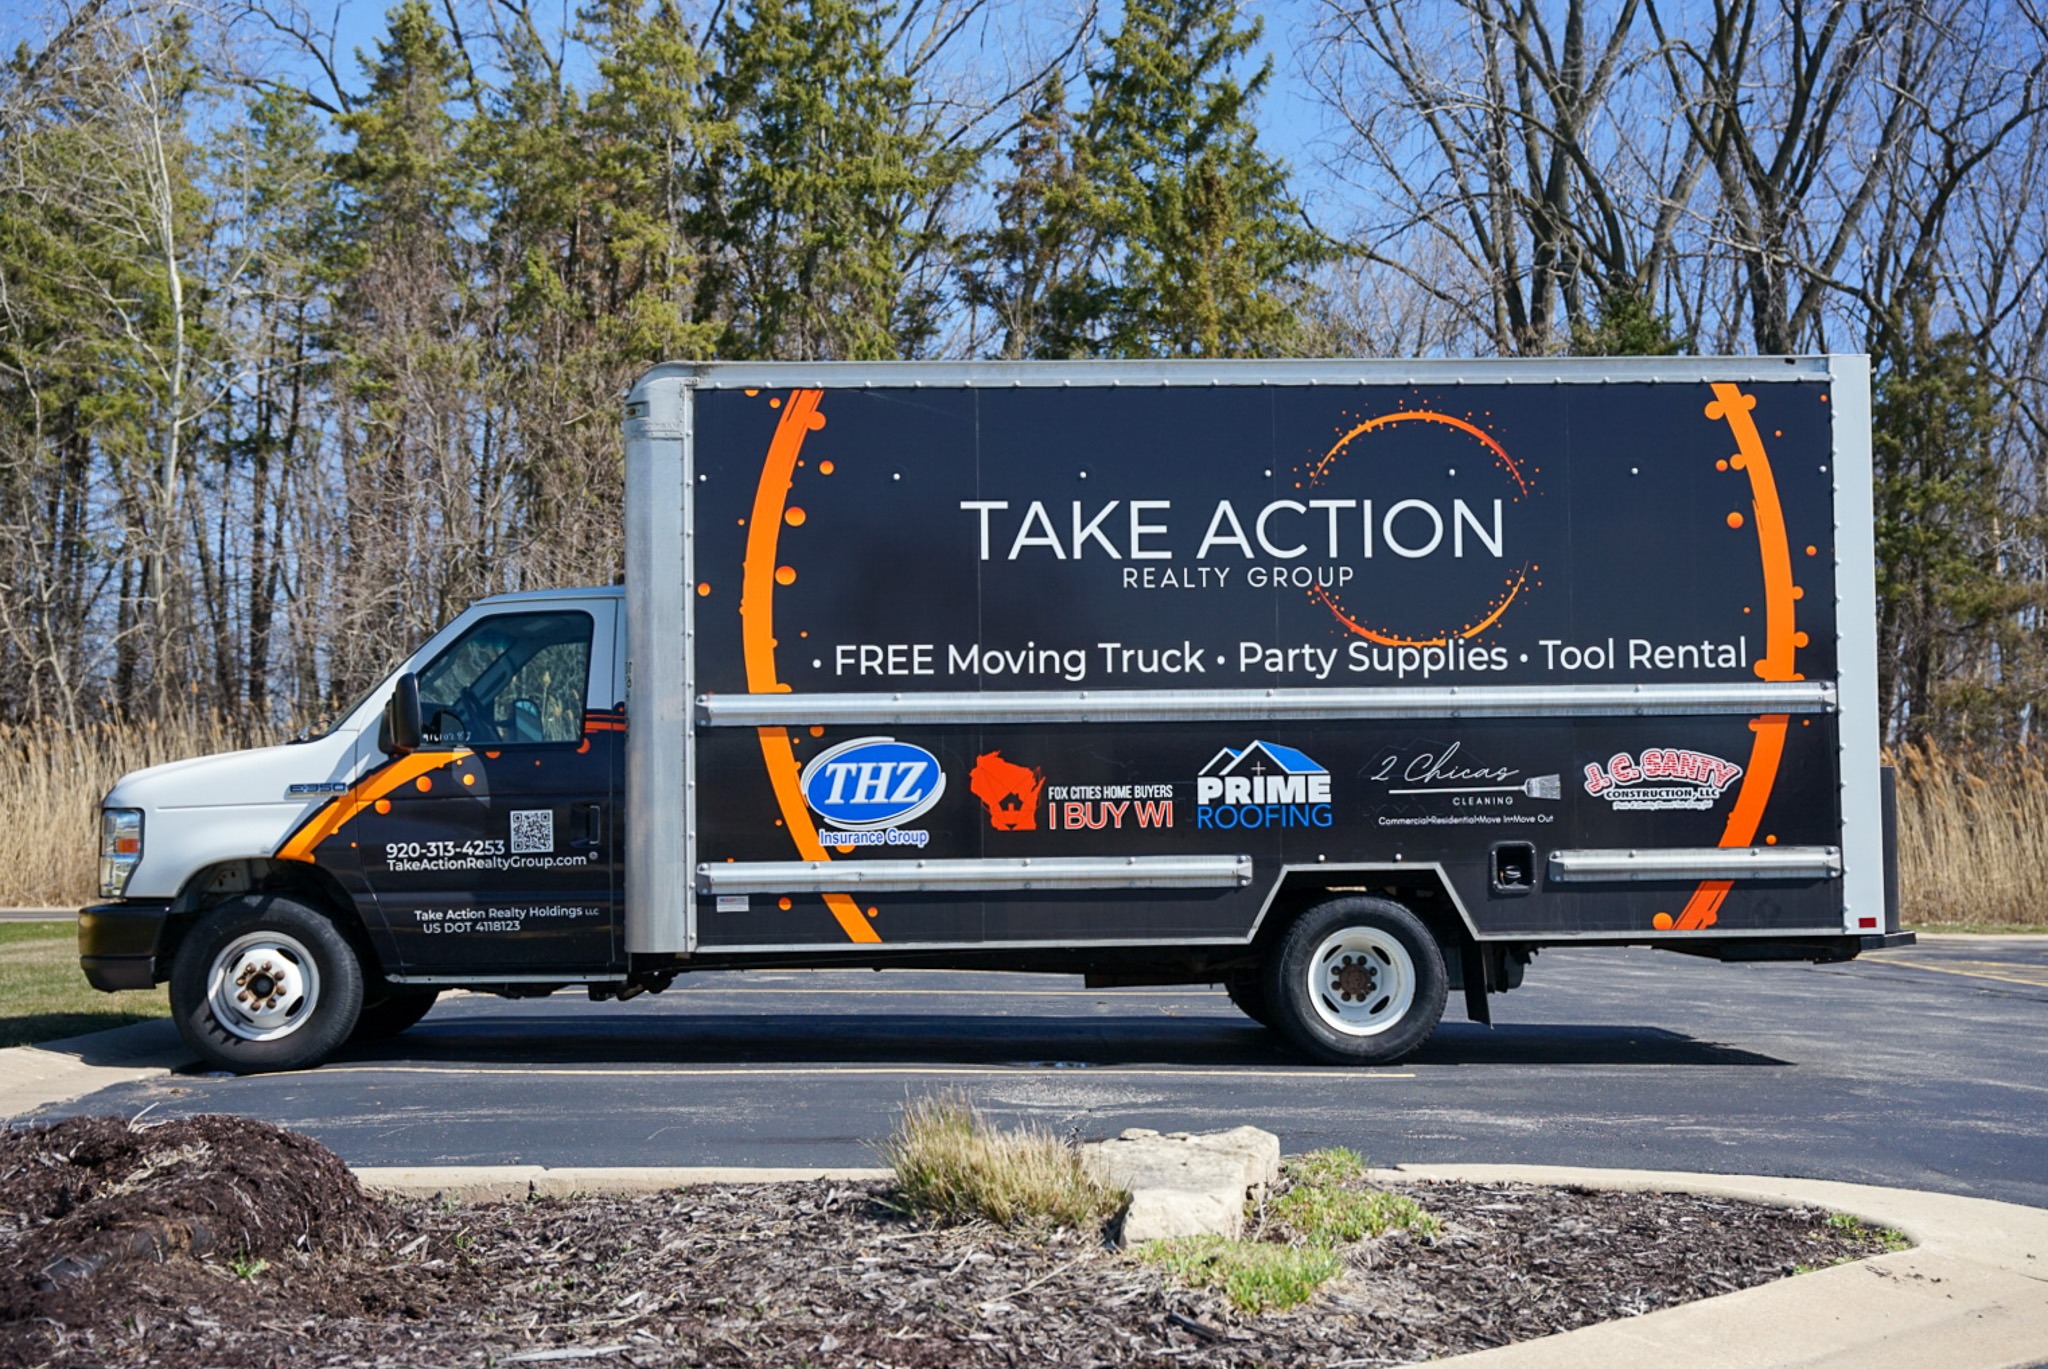 Smooth Moving Day Ahead: NE Wisconsin Brokerage Offers Moving Truck!